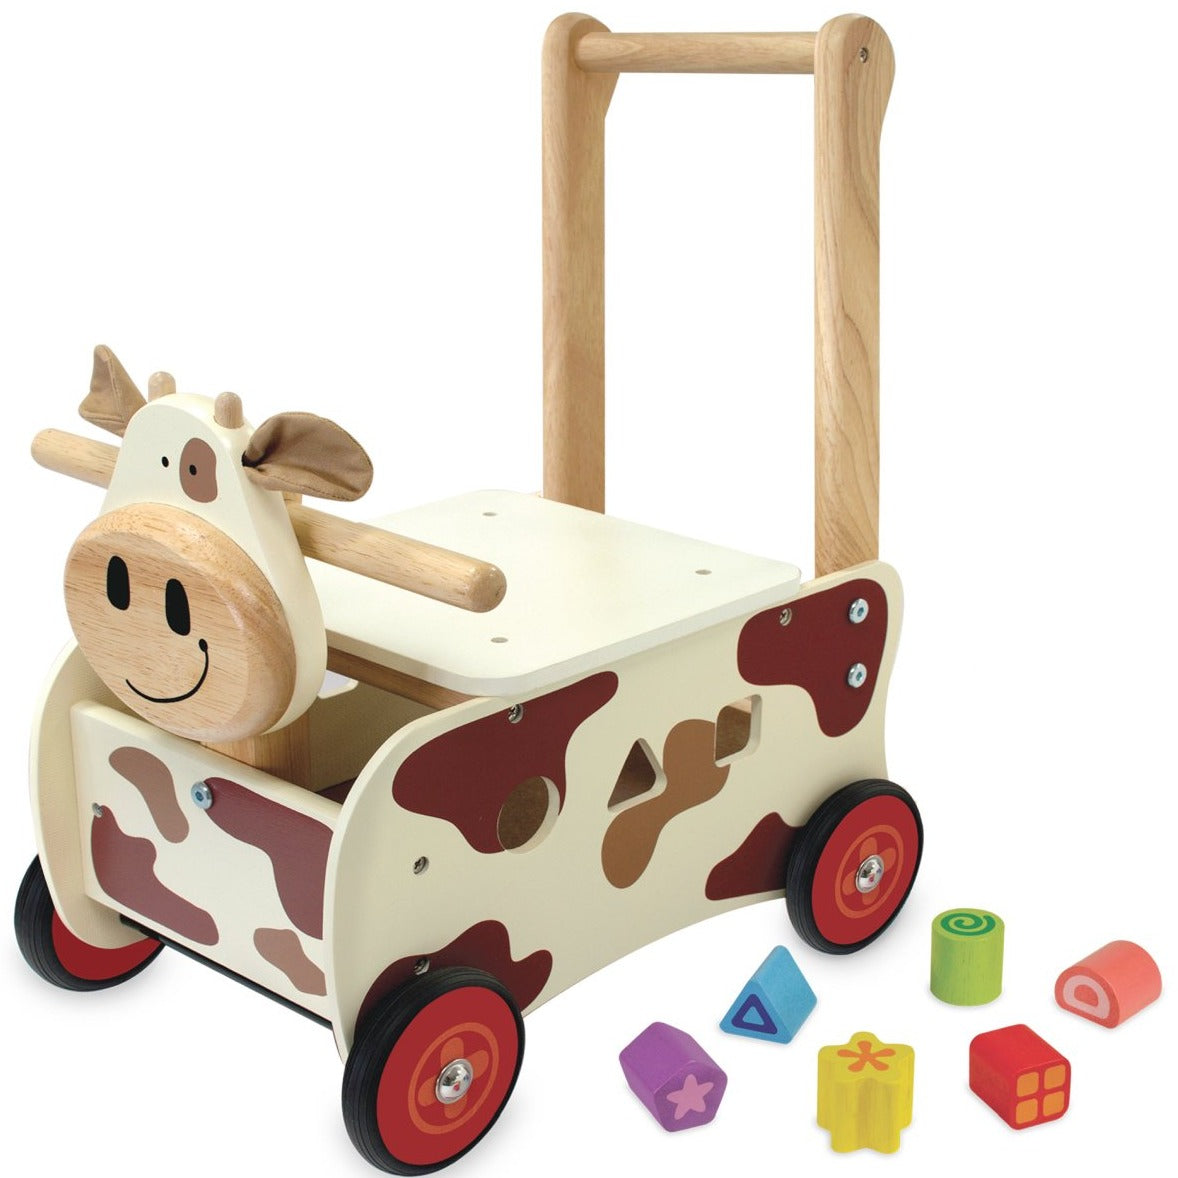 Walk and ride on cow shape sorter - Angus and Dudley